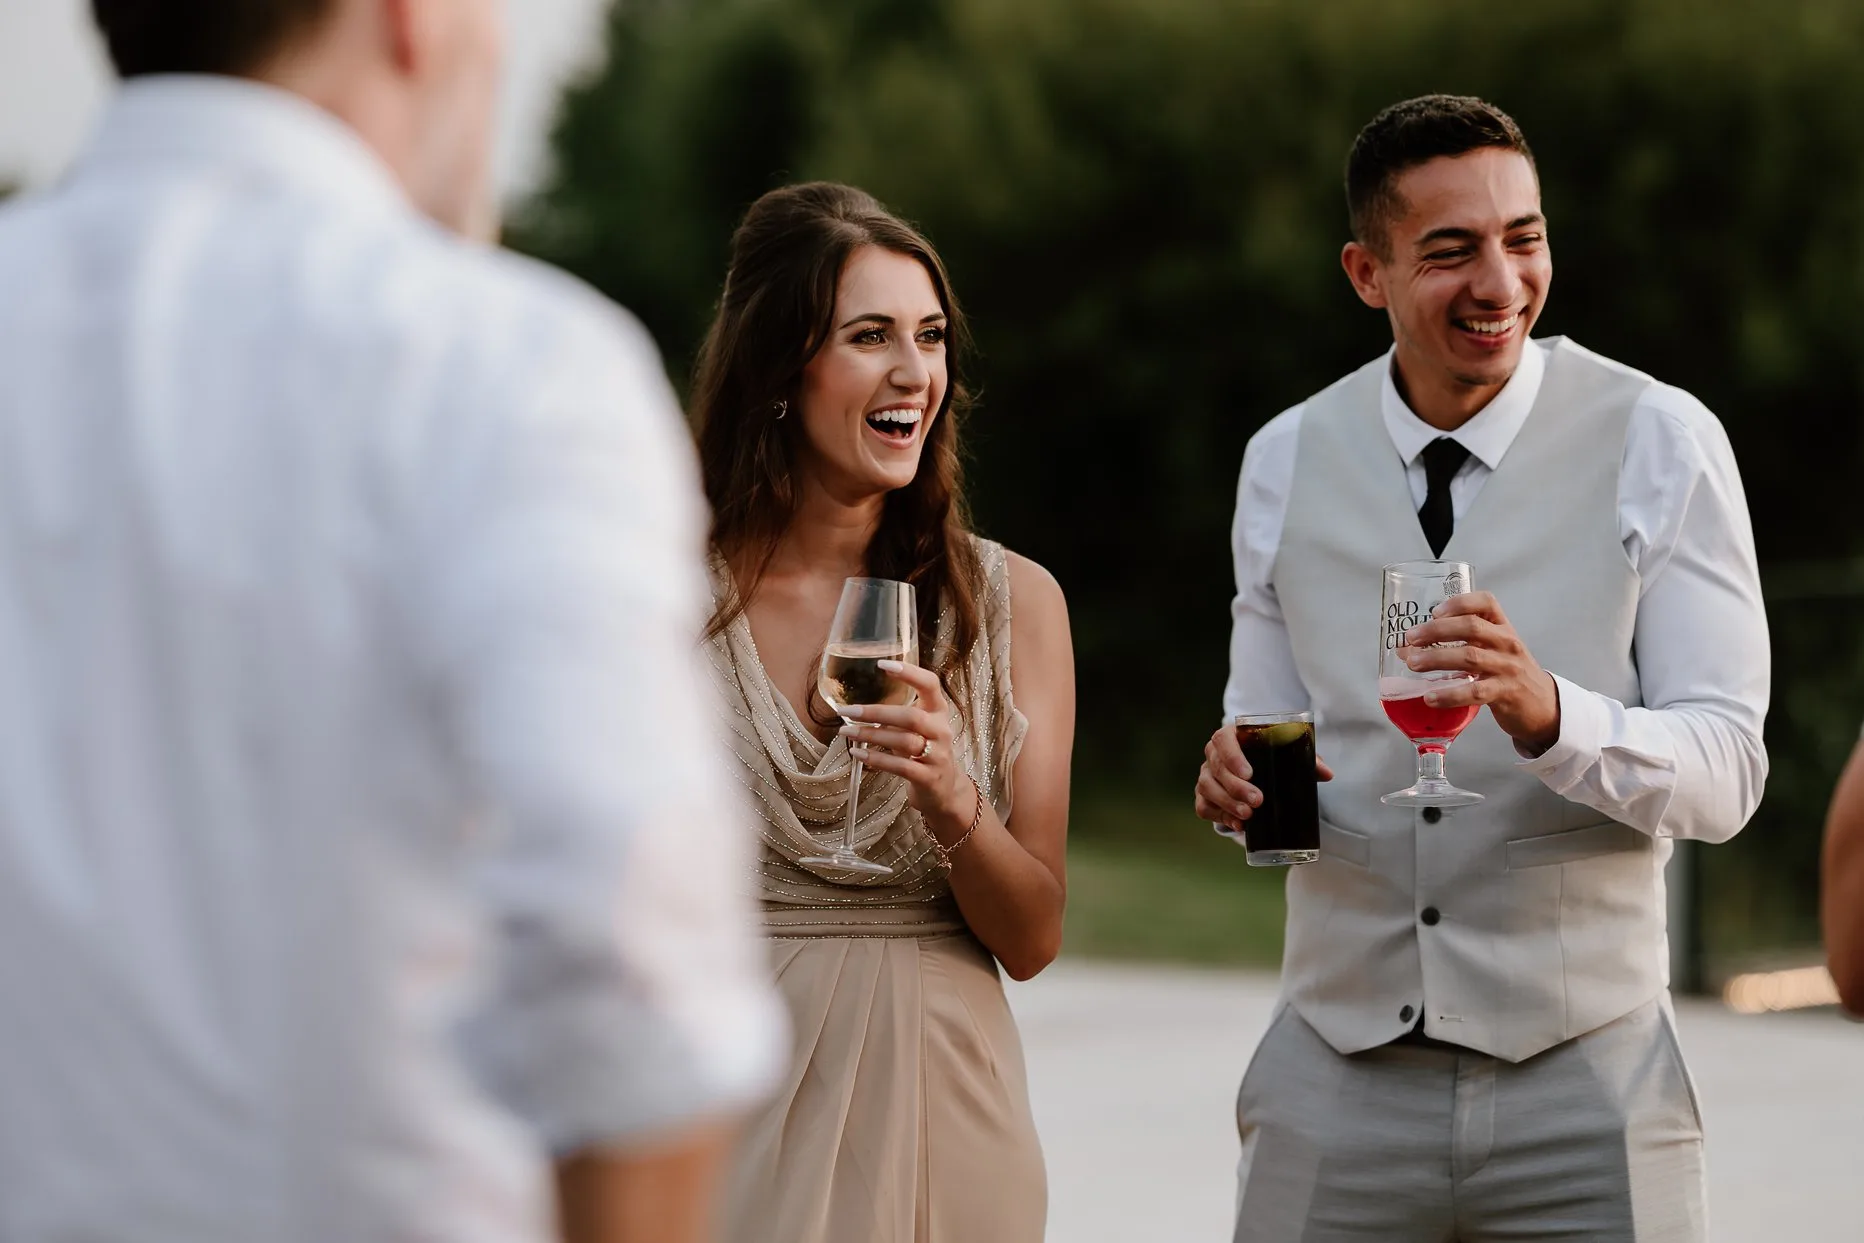 Natural photograph of two wedding guests laughing and smiling.